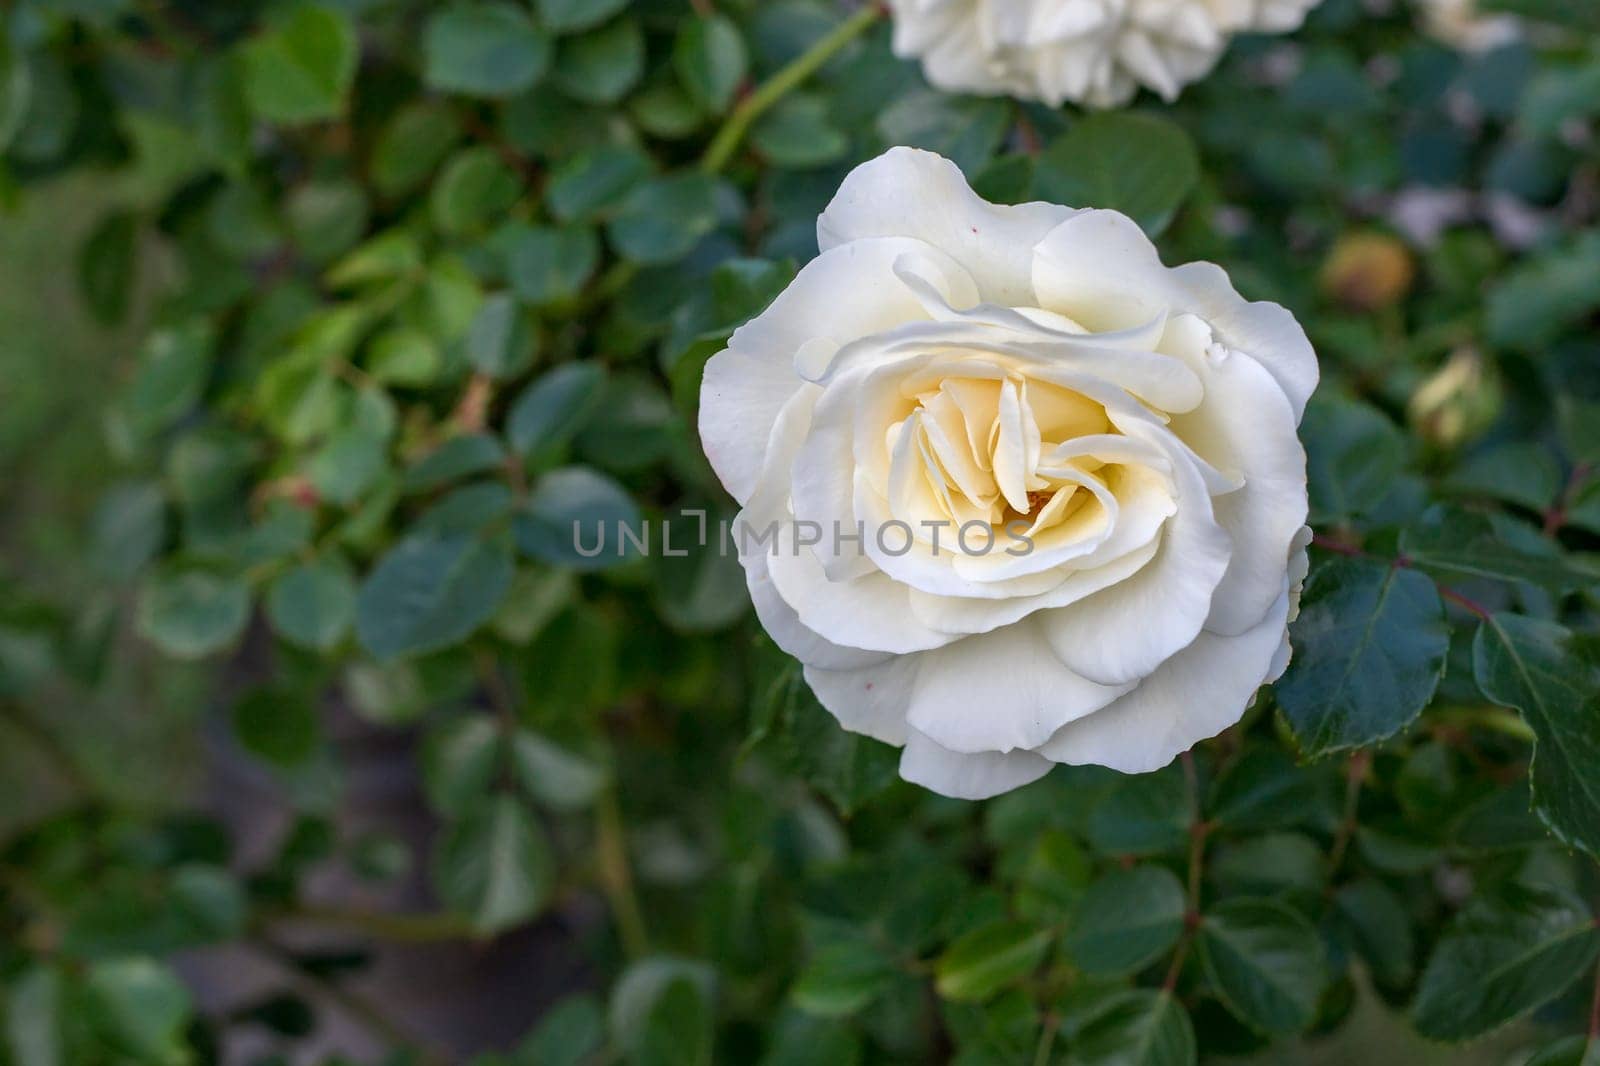 View from above of a beauty white rose with a blurred background.